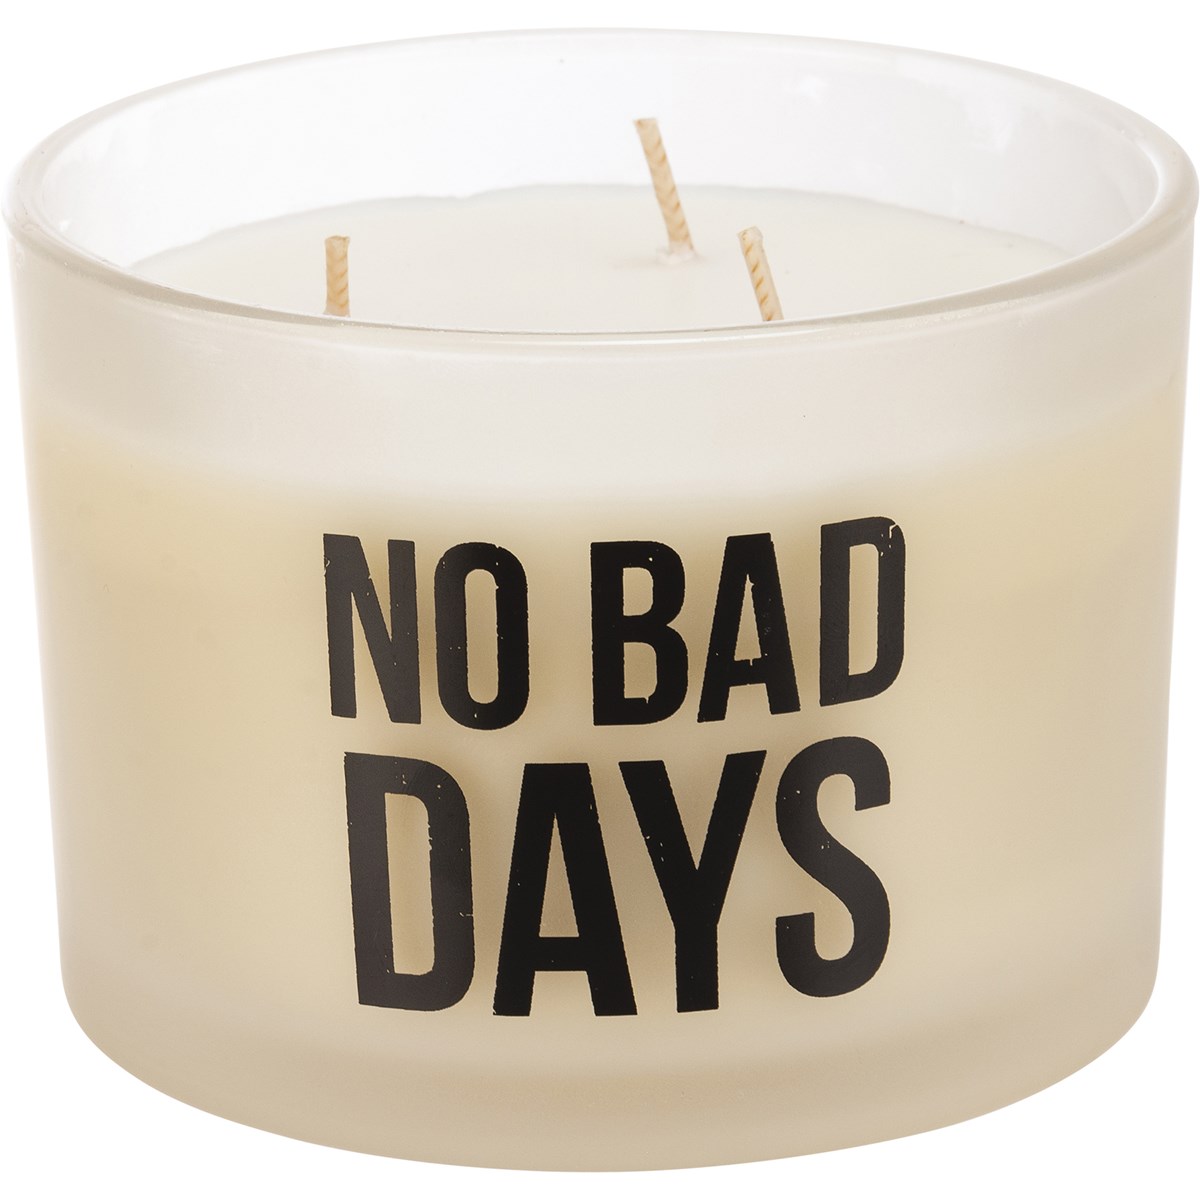 No Bad Days Jar Candle - Soy Wax, Glass, Cotton